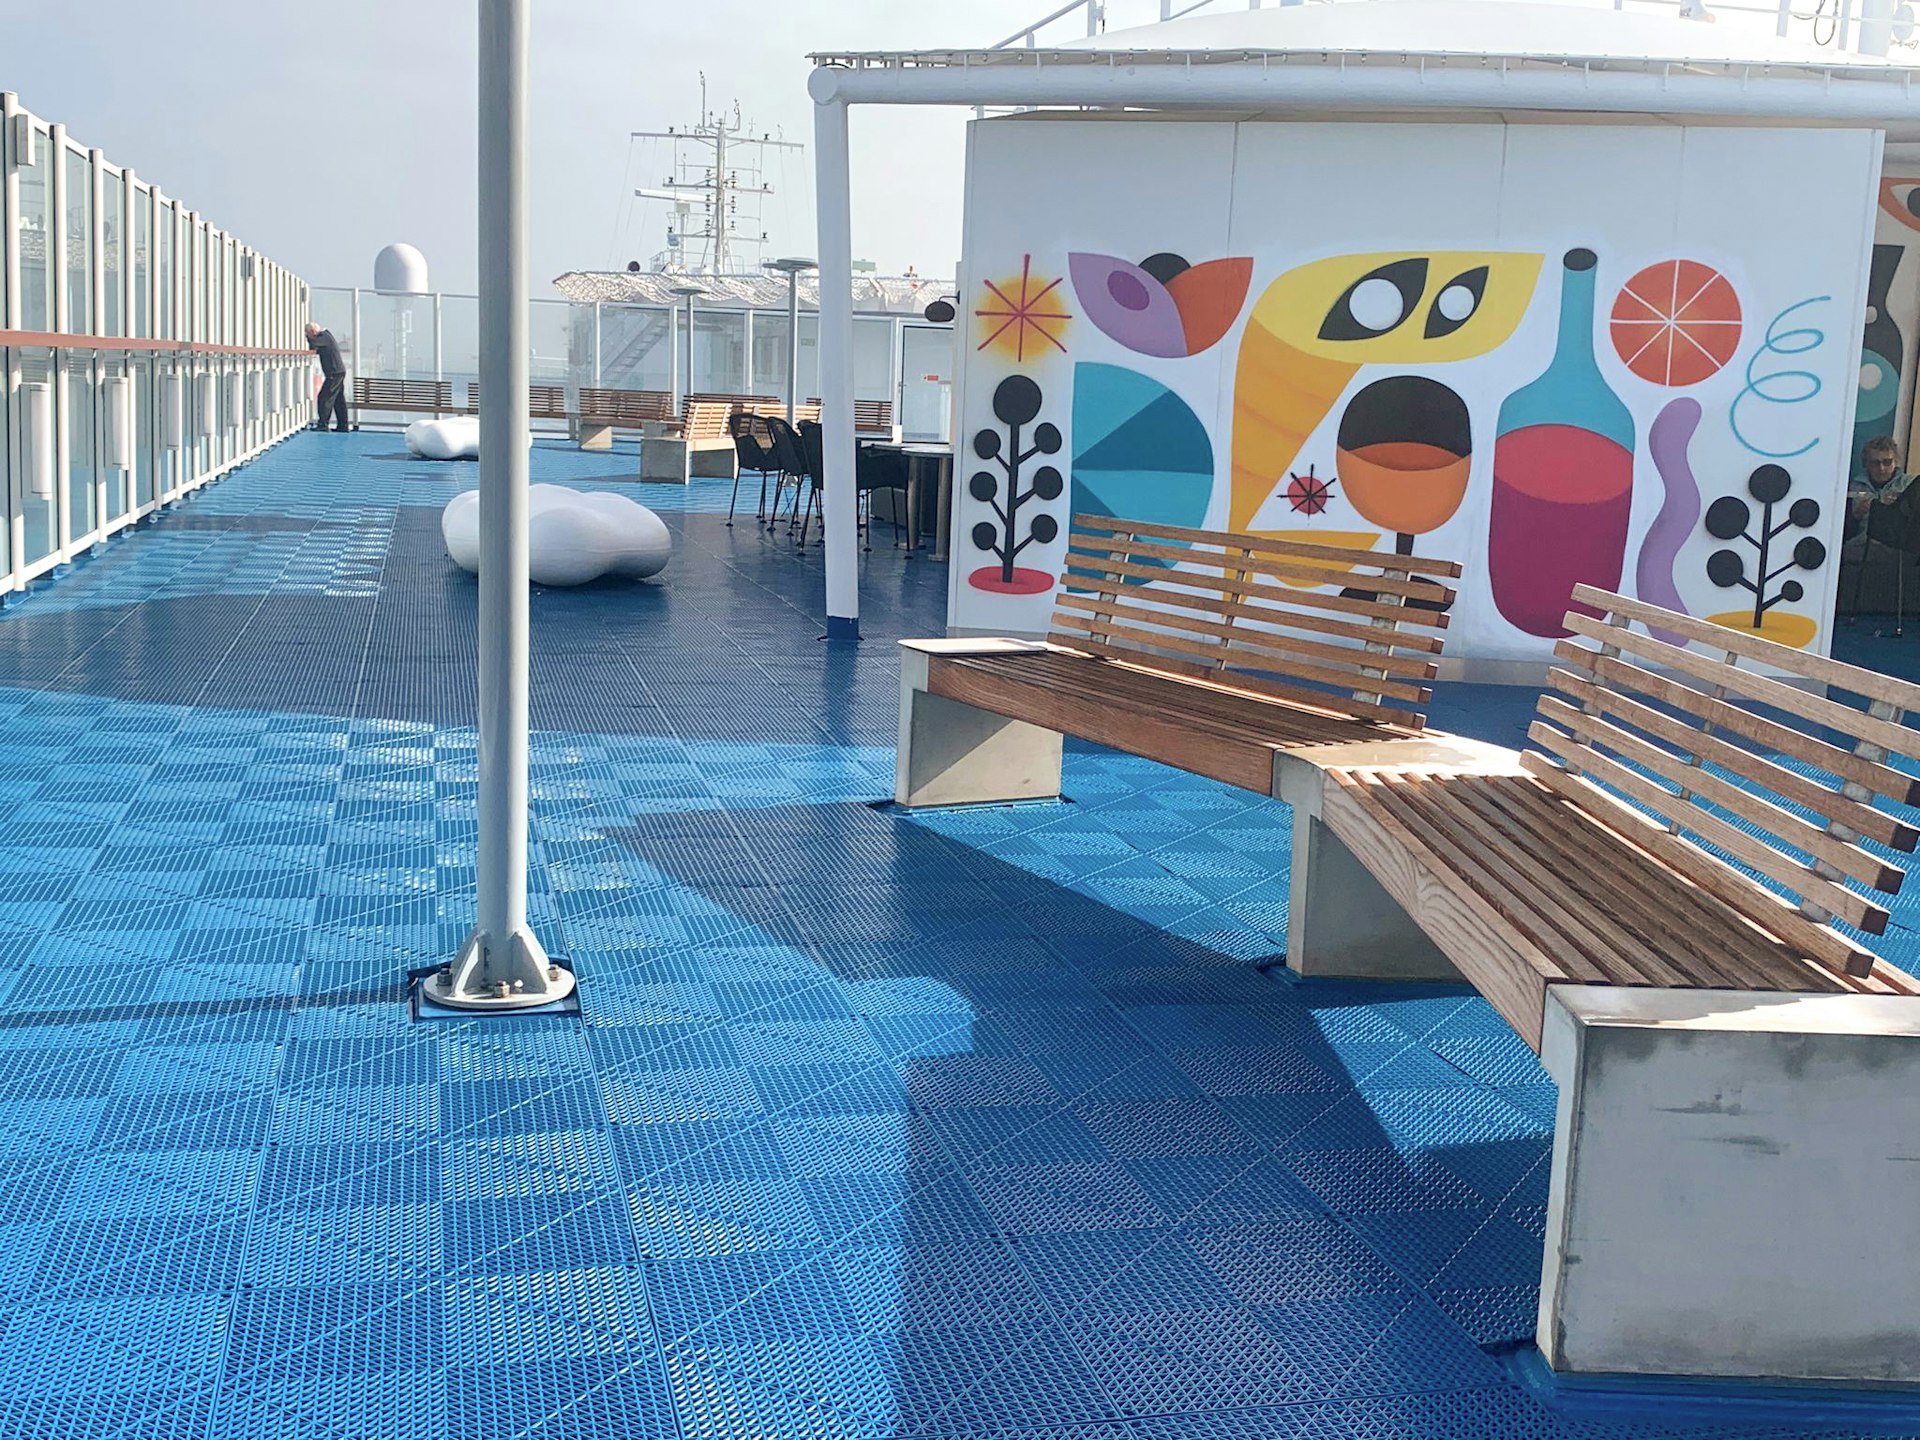 The deck of Brittany Ferries’ Salamanca 